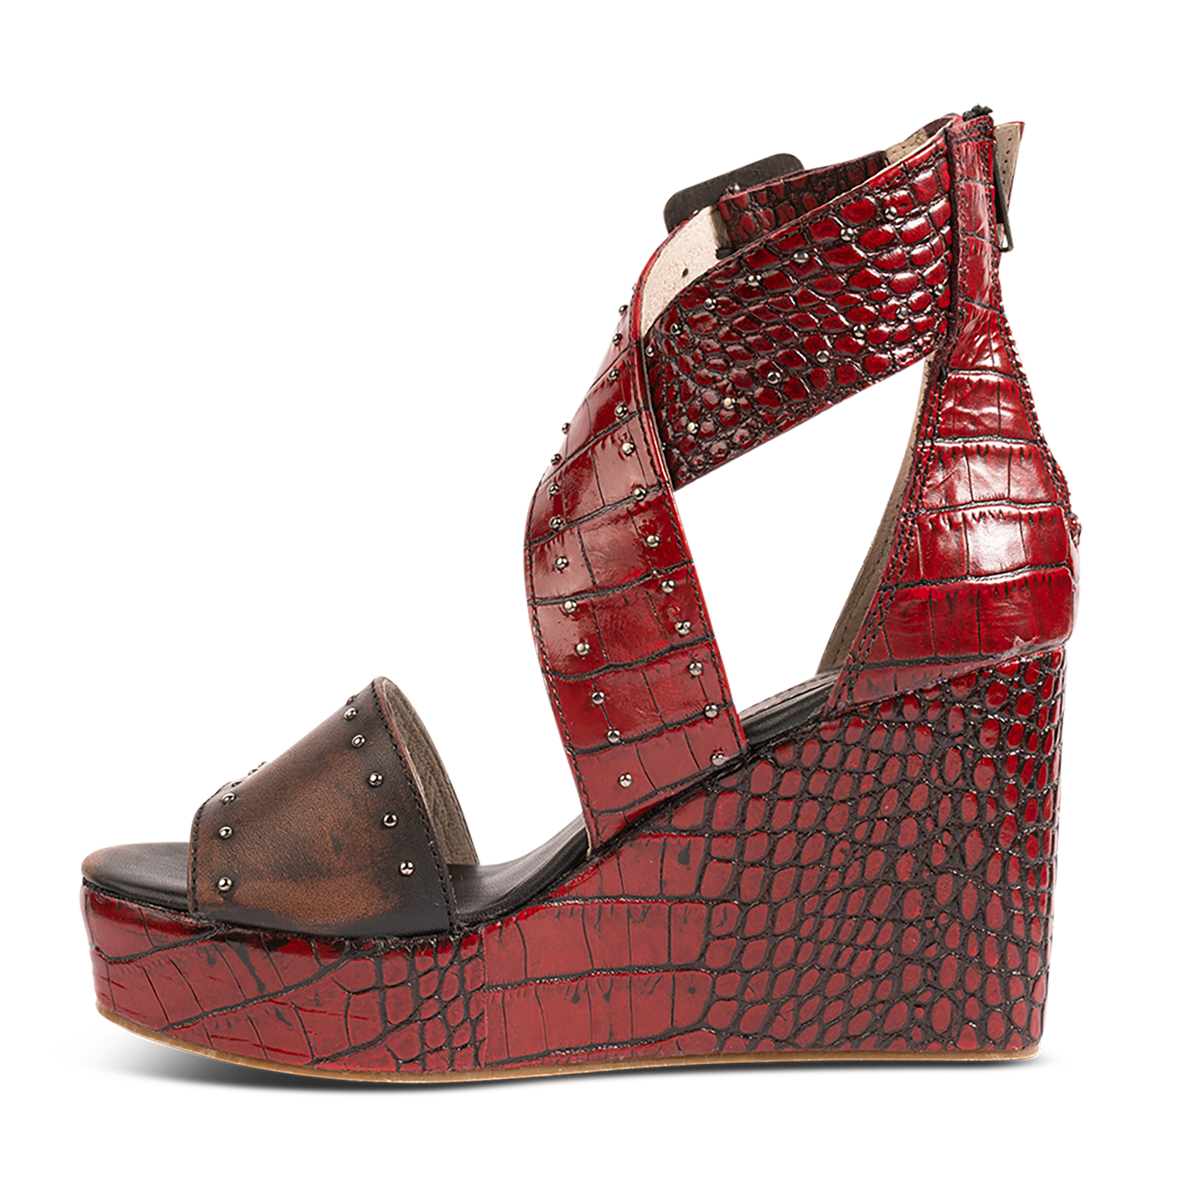 Inside view showing wedge heel and ankle straps on FREEBIRD women's Terra red croco multi platform sandal with stud detailing